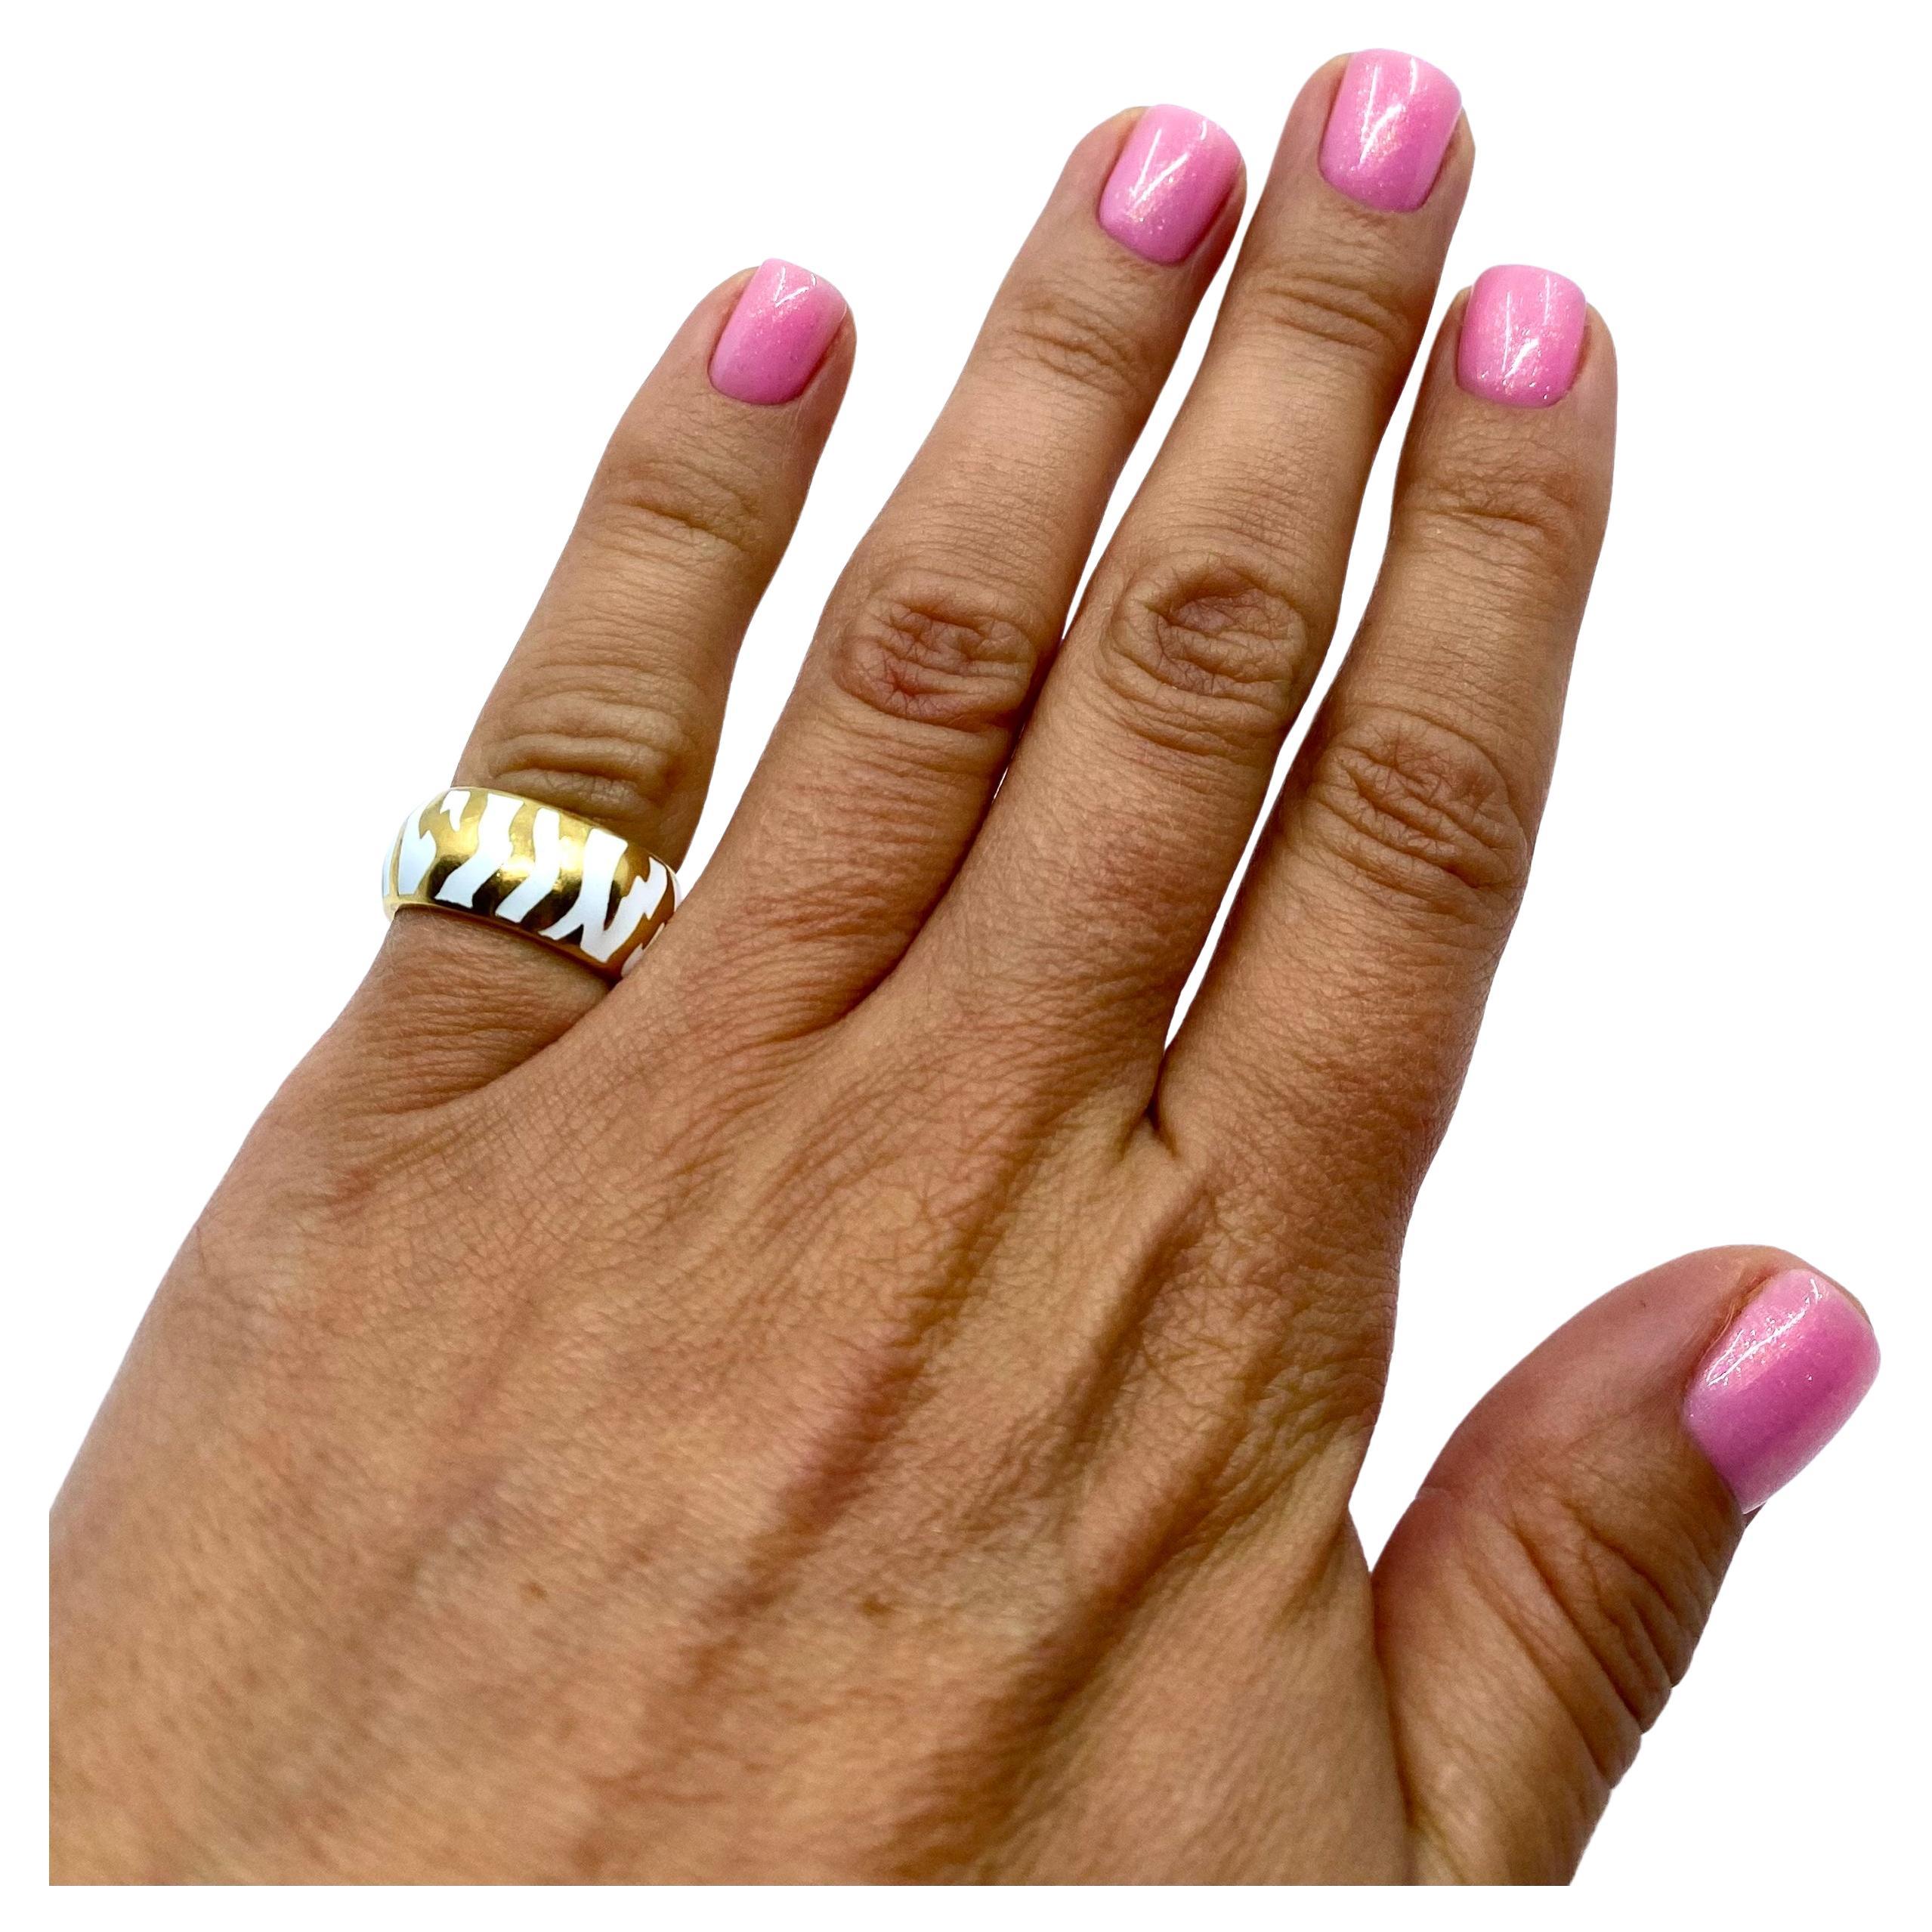 A fun vintage ring by Andrew Clunn, made of 18k gold and white enamel. In this ring was used a zebra pattern by applying white enamel on the yellow gold background. The pattern along with the puffed shape of the band creates a unique, undeniably